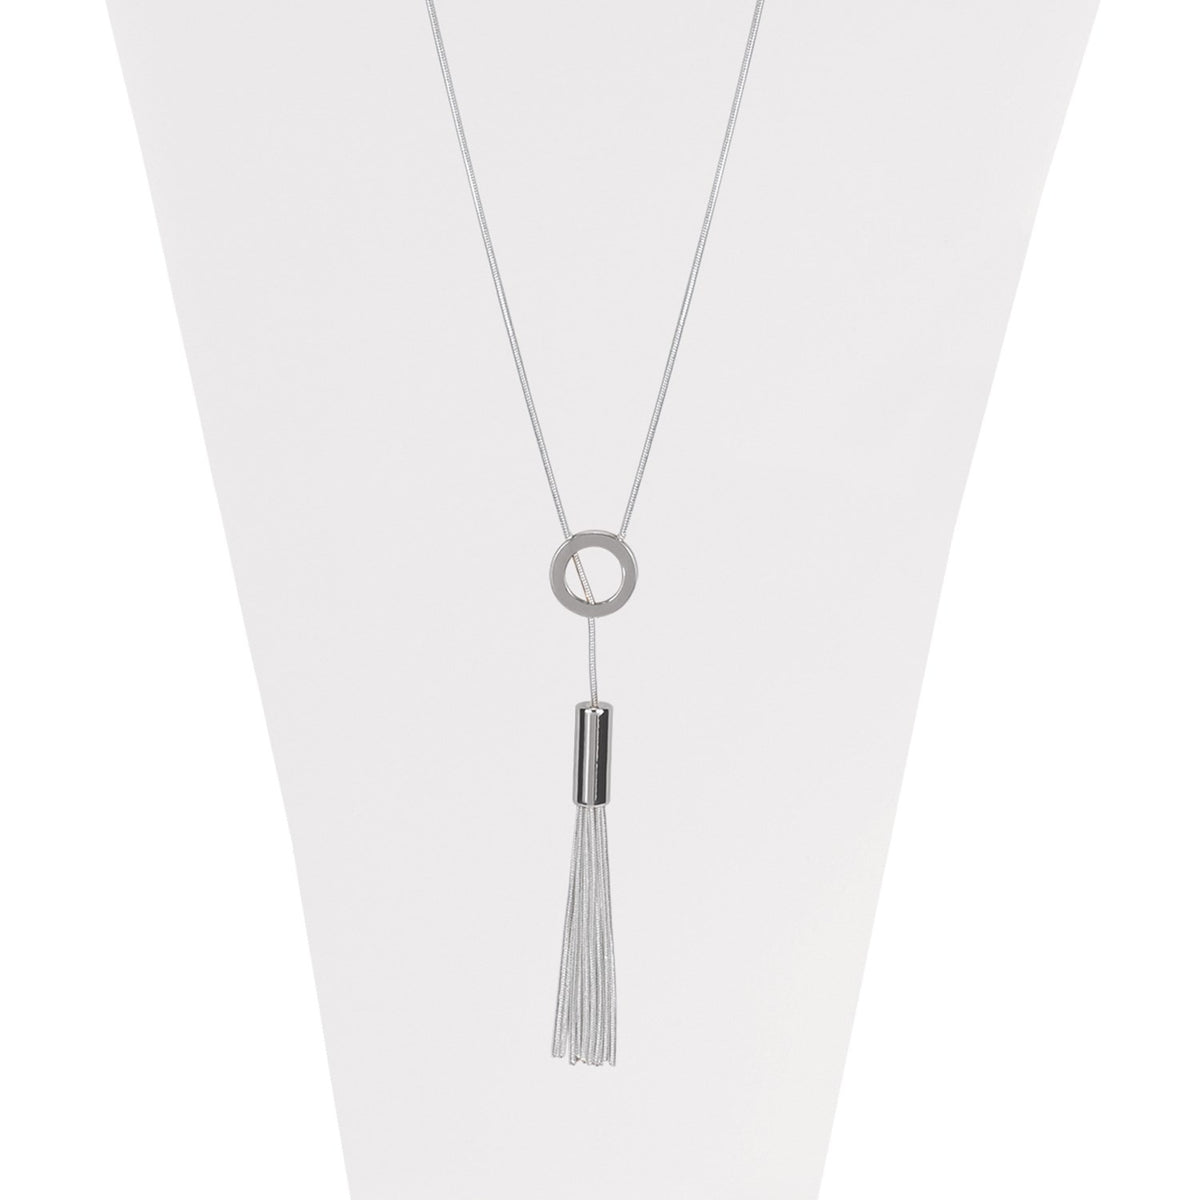 Silver long adjustable necklace with metallic ring and multi chain tassels